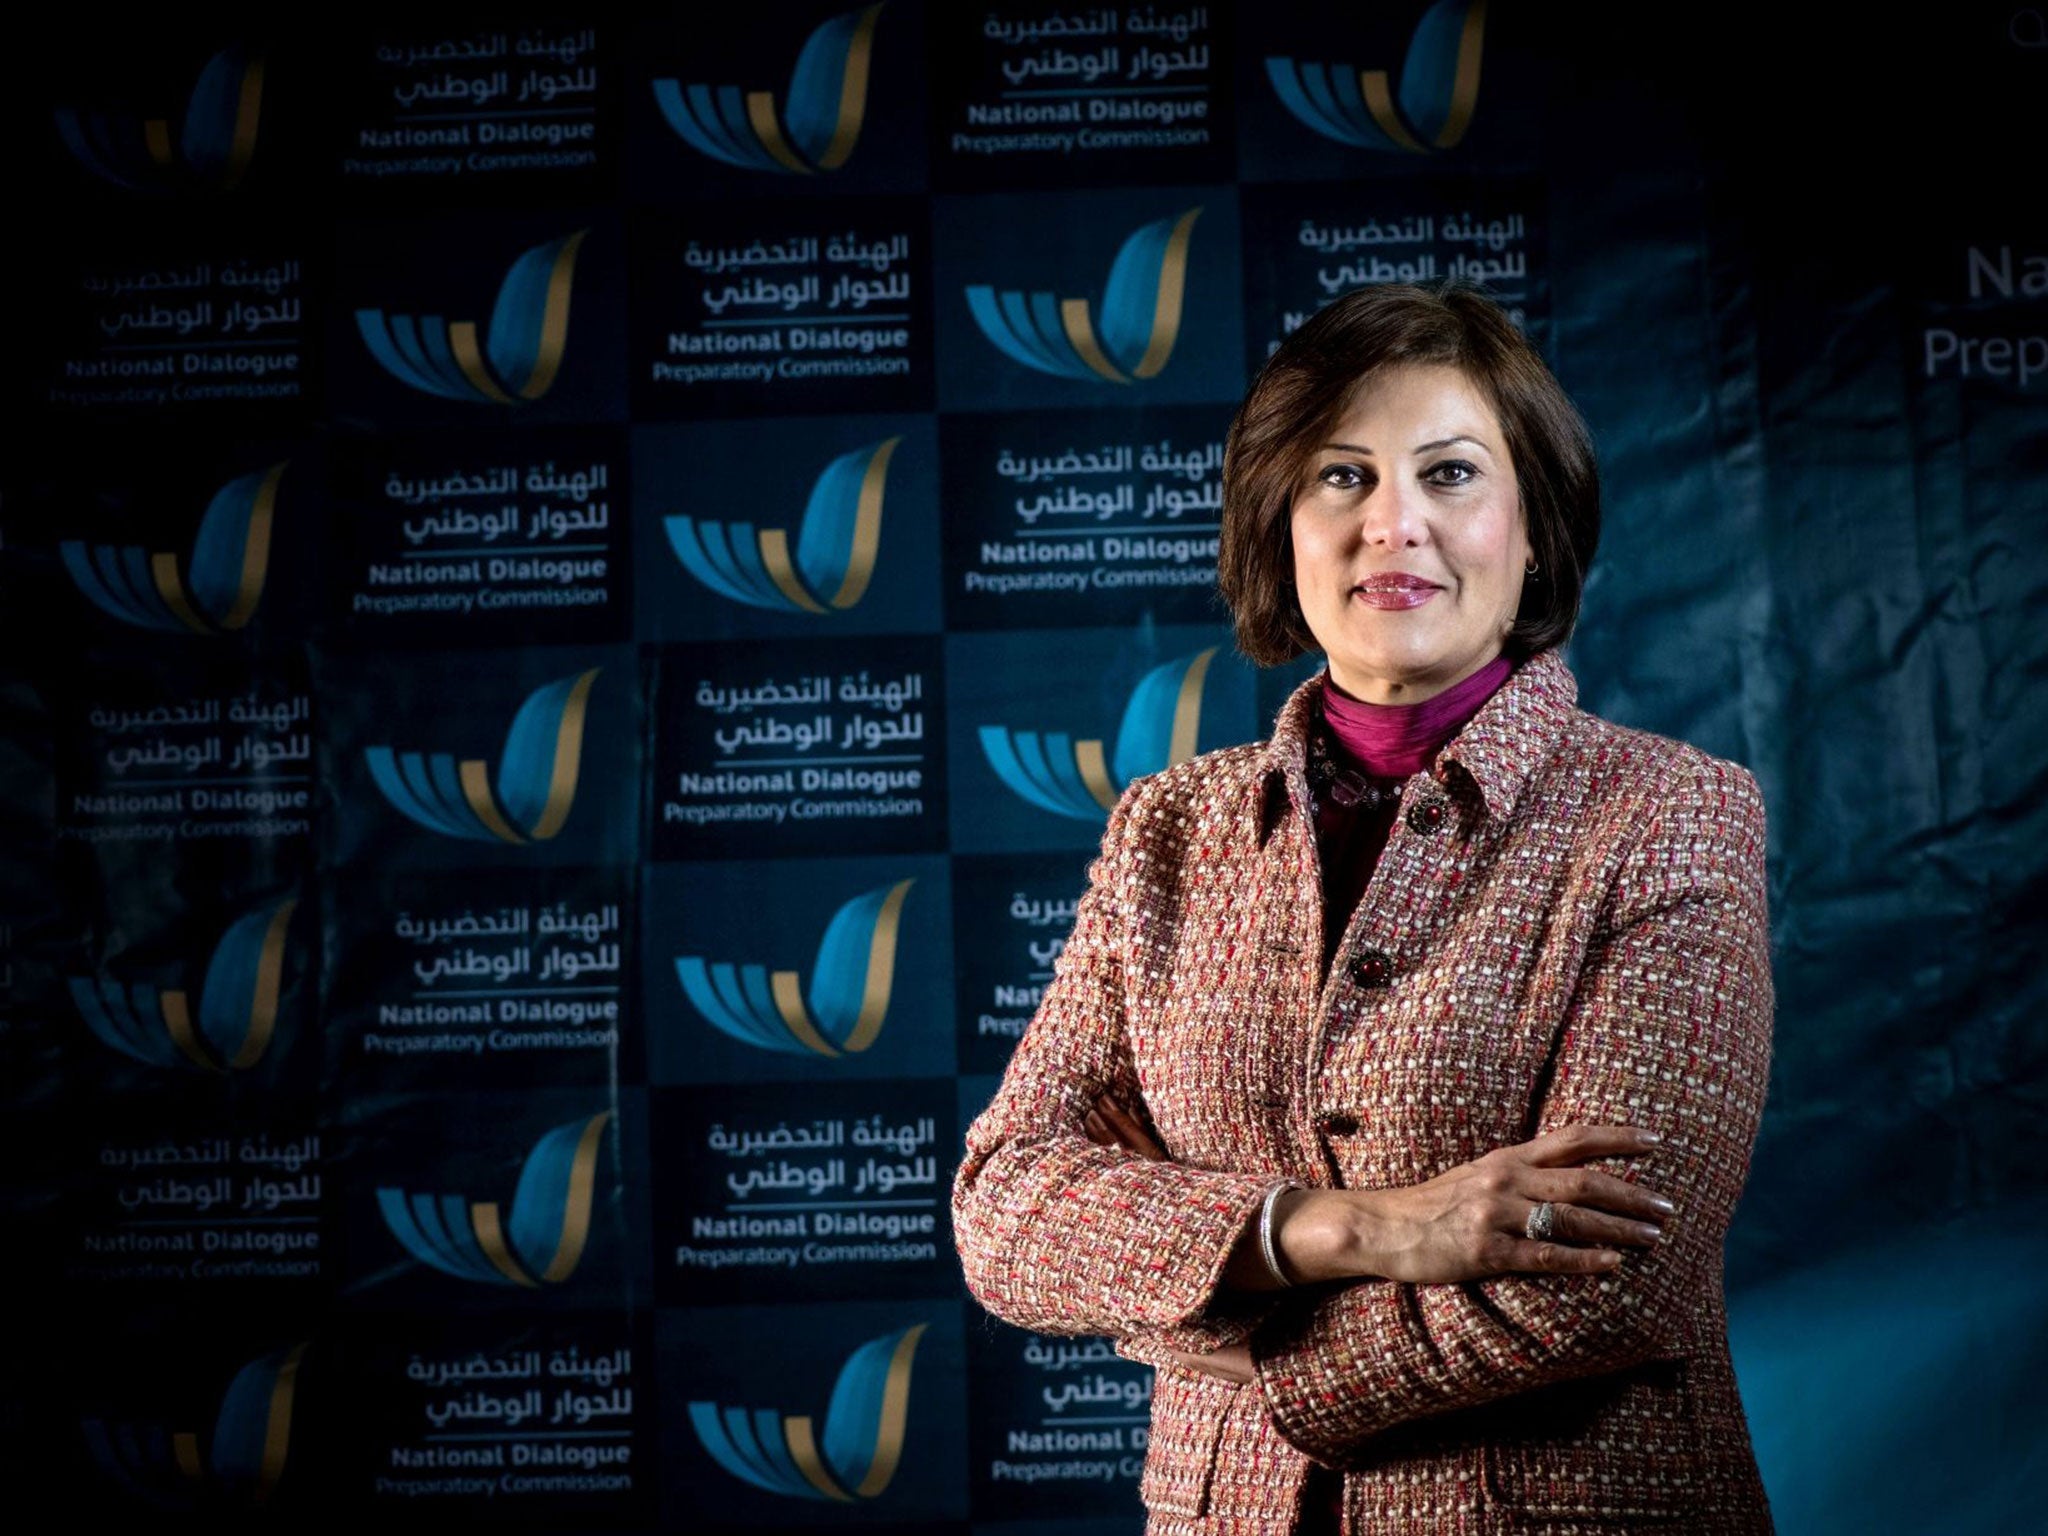 Salwa Bugaighis, lawyer and rights activist and one of Libya's most prominent female activists, was assassinated in the restive eastern city of Benghazi when gunmen stormed her house